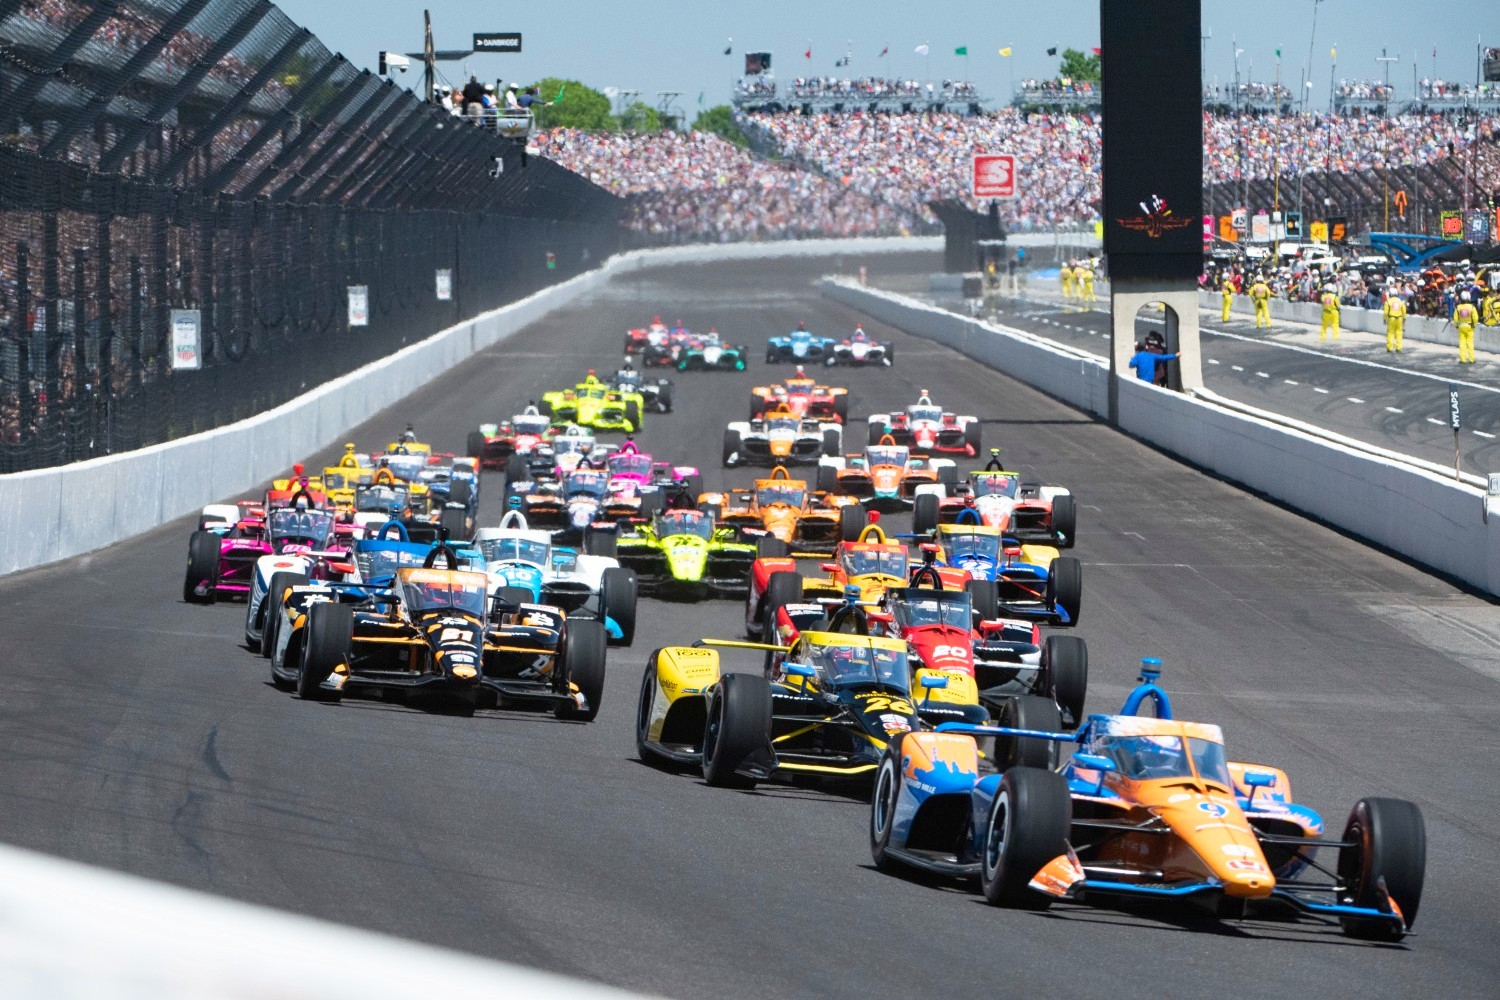 2022 Indy 500 Kickoffs Sunday 29th May, Full Indianapolis Day start